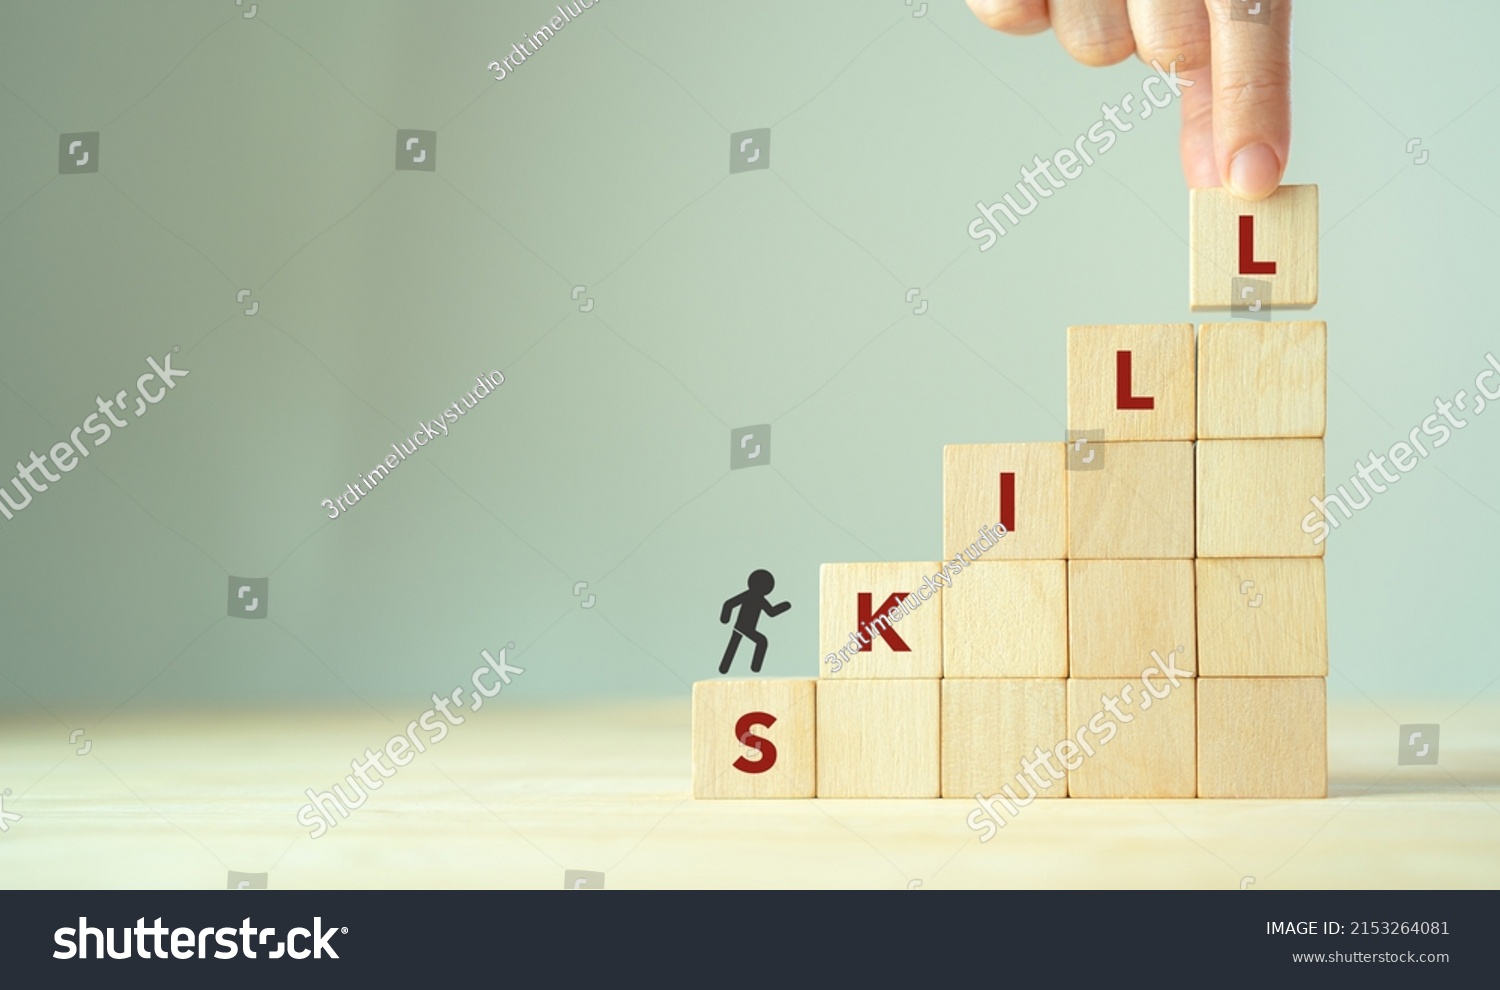 Upskilling and personal development concept. Skill training, education, learning, ability, knowledge and competency  for digital transformantion. Upskilling, reskilling, new skills icon on wooden cube #2153264081